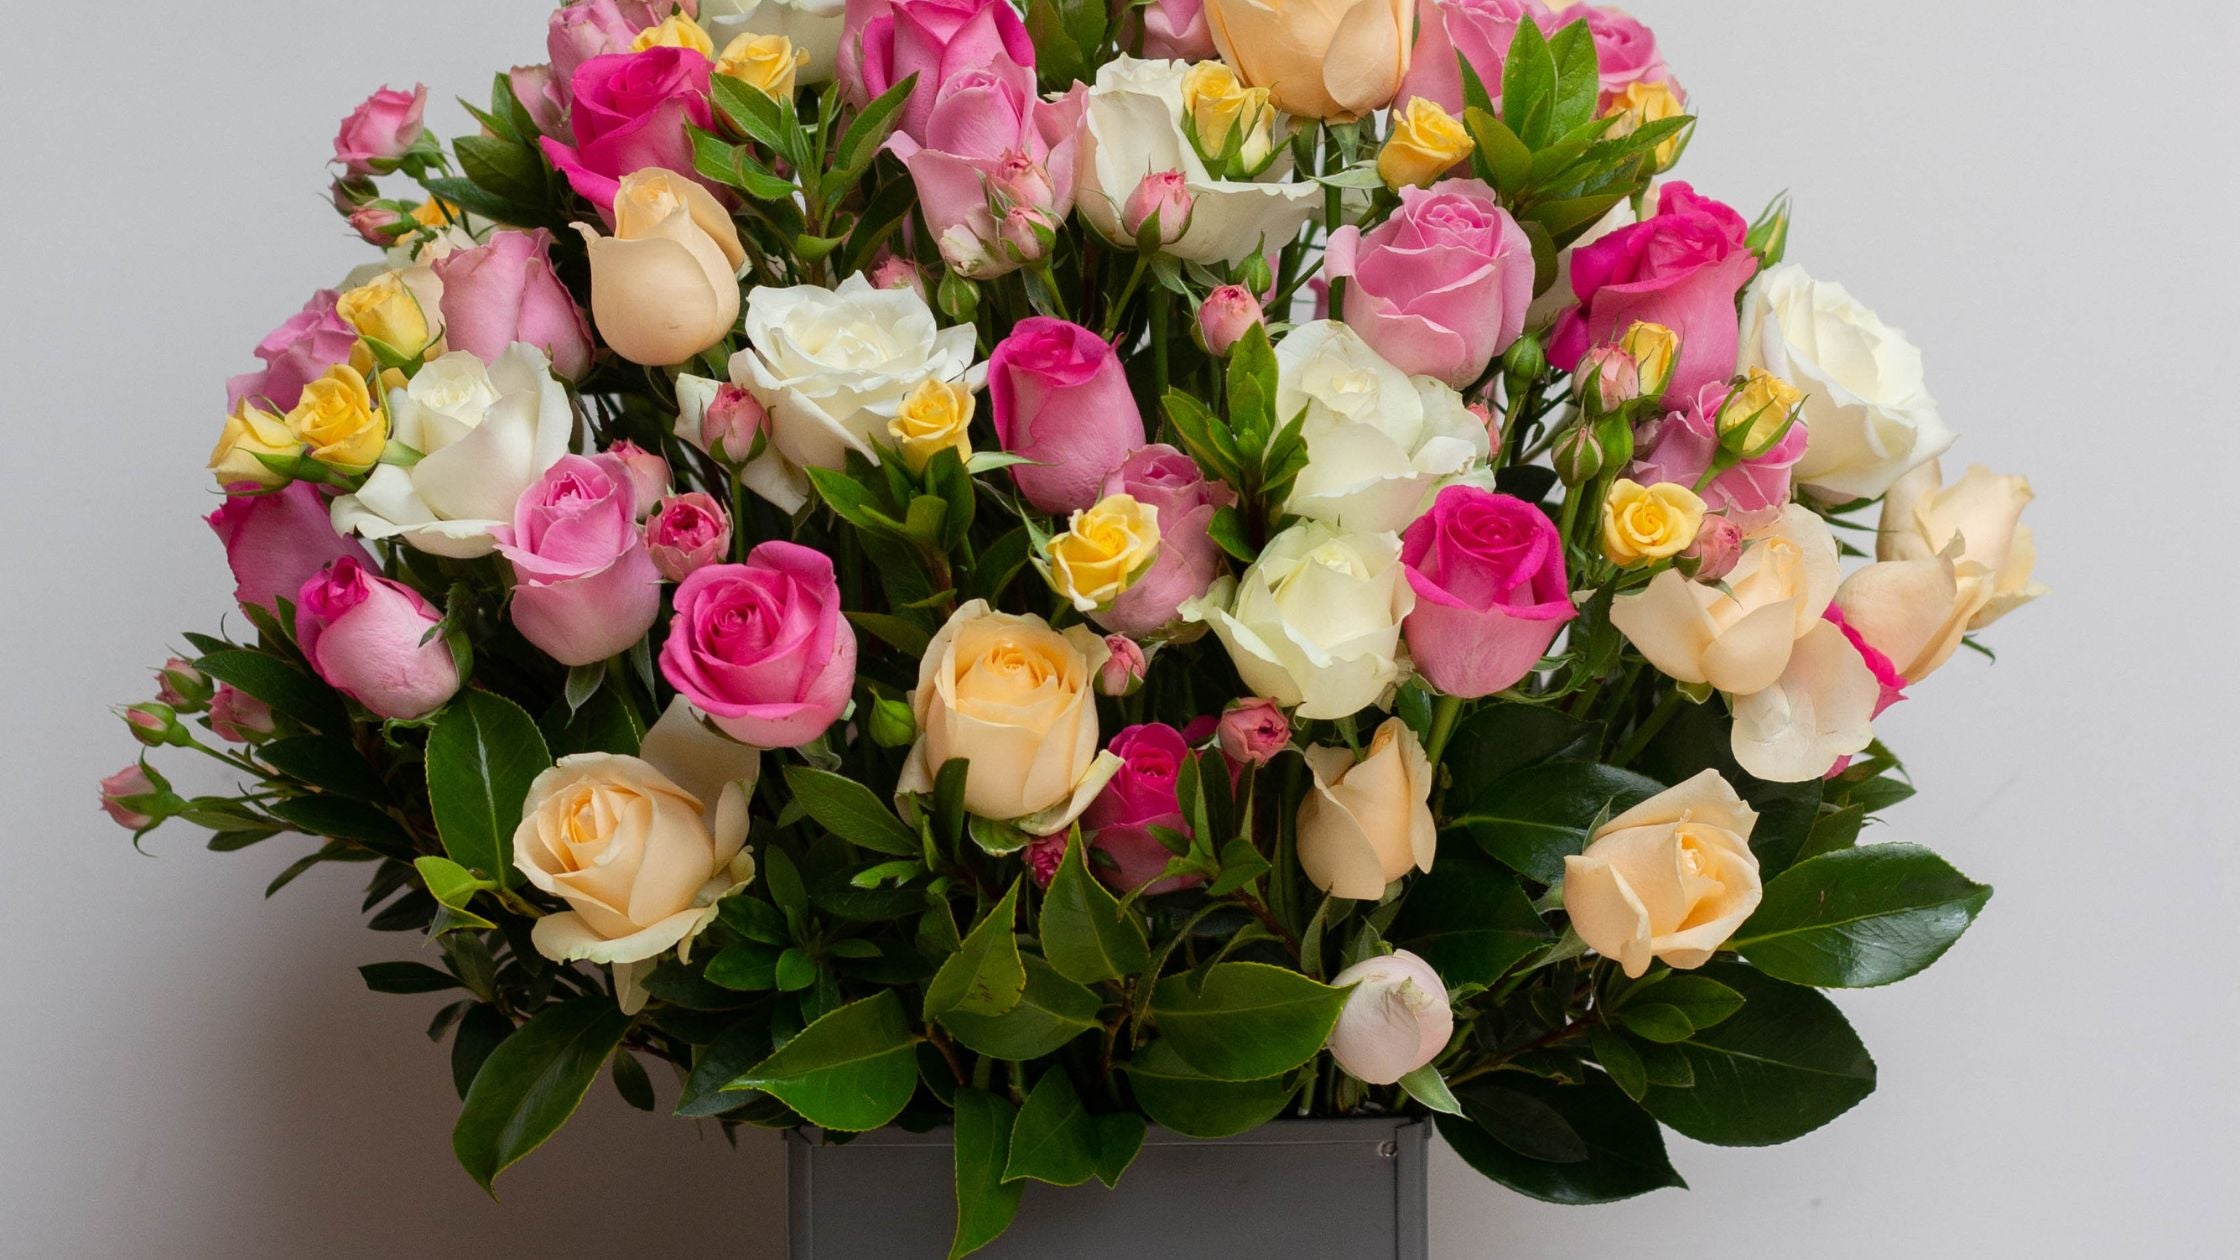 Top 5 Rose Flower Gift Ideas For Your